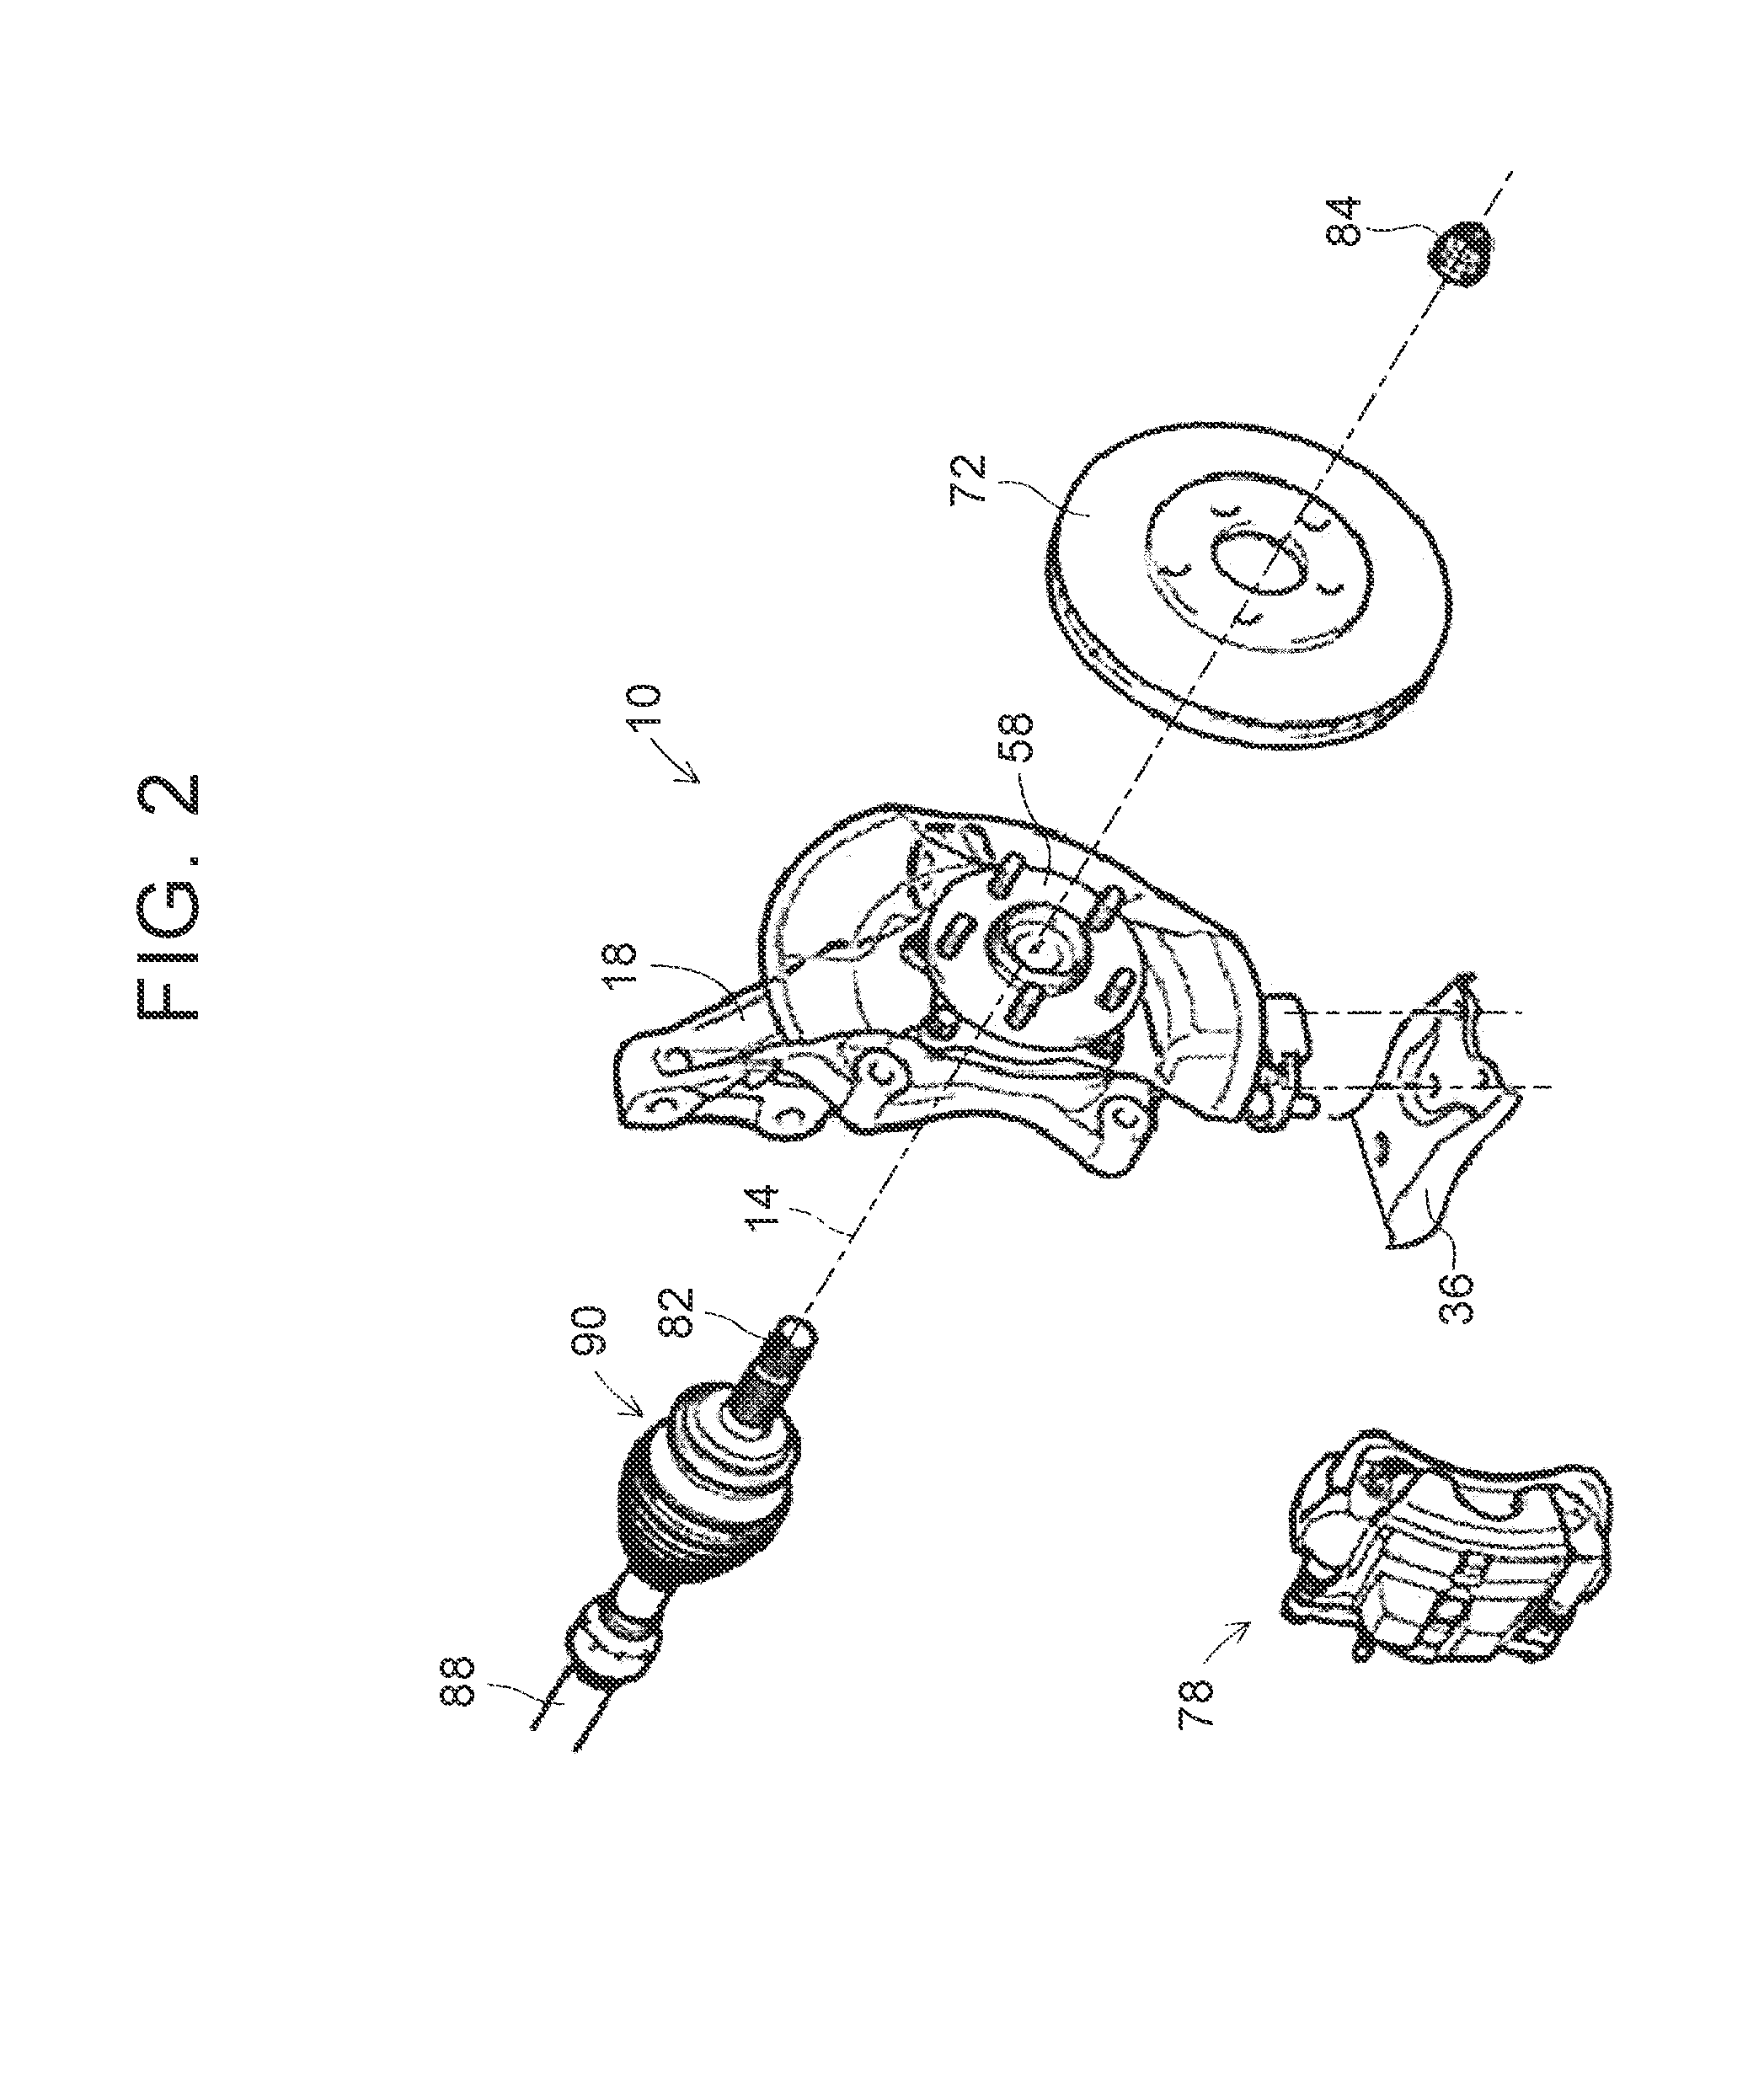 Wheel support device for vehicle